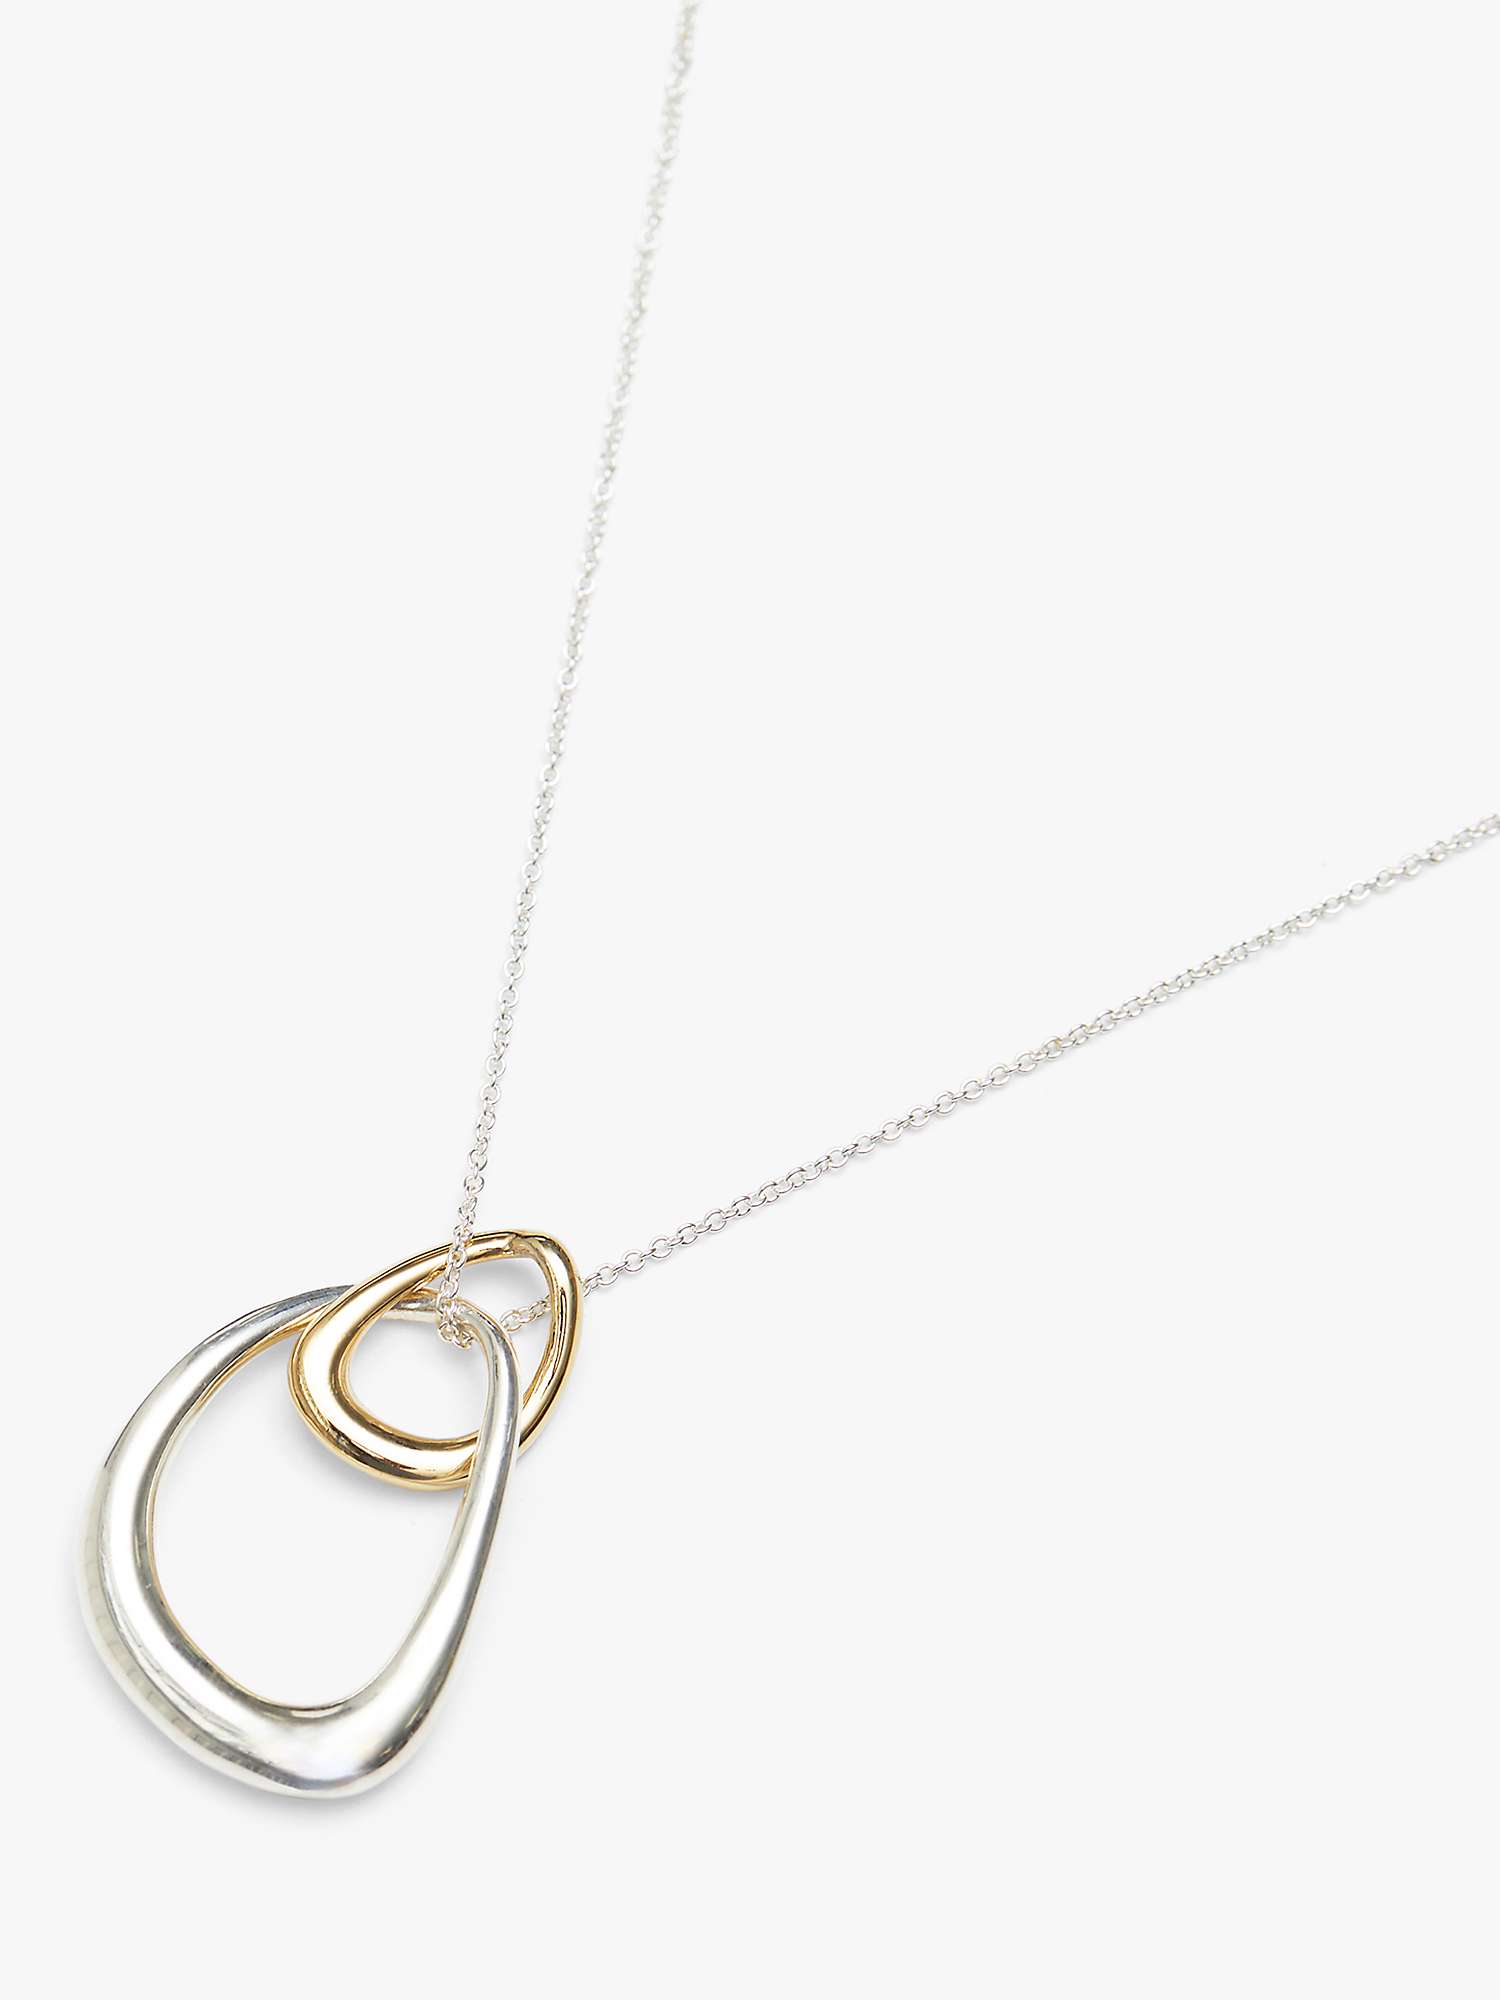 Buy Simply Silver Two Tone Pendant Necklace, Silver/Gold Online at johnlewis.com